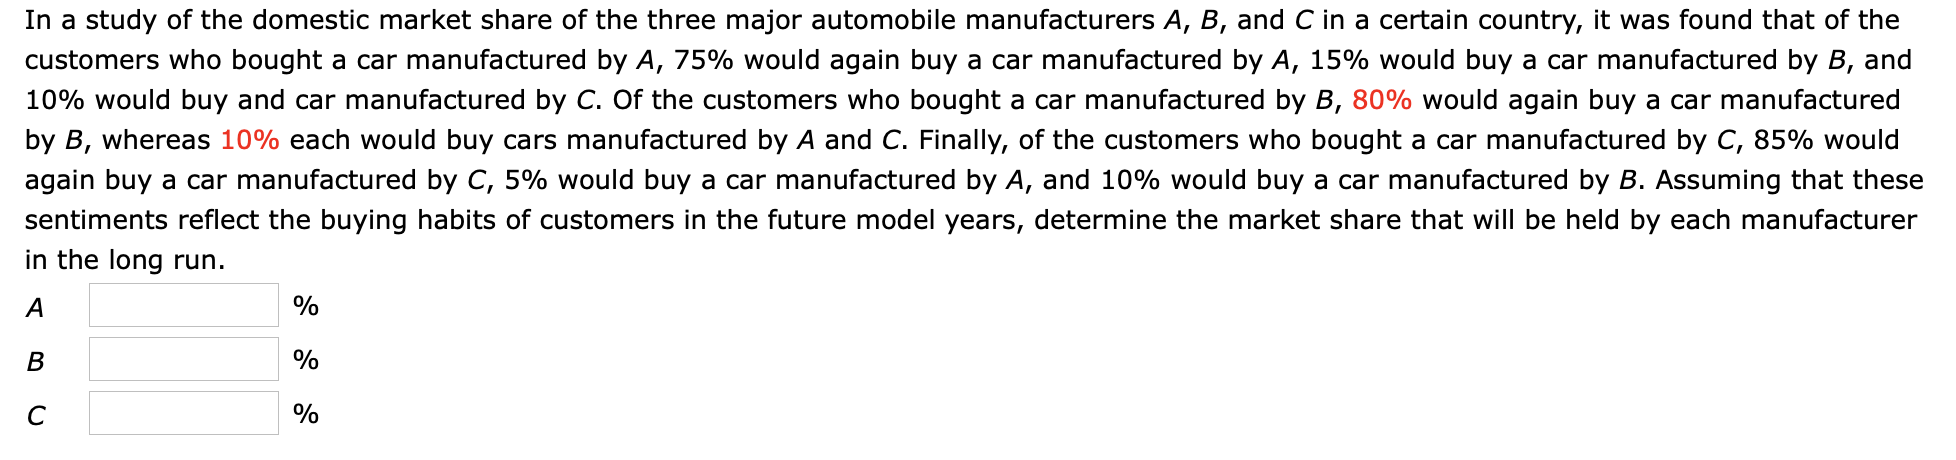 In a study of the domestic market share of the three major automobile manufacturers A, B, and C in a certain country, it was found that of the
customers who bought a car manufactured by A, 75% would again buy a car manufactured by A, 15% would buy a car manufactured by B, and
10% would buy and car manufactured by C. Of the customers who bought a car manufactured by B, 80% would again buy a car manufactured
by B, whereas 10% each would buy cars manufactured by A and C. Finally, of the customers who bought a car manufactured by C, 85% would
again buy a car manufactured by C, 5% would buy a car manufactured by A, and 10% would buy a car manufactured by B. Assuming that these
sentiments reflect the buying habits of customers in the future model years, determine the market share that will be held by each manufacturer
in the long run.
A
%
B
%
%
